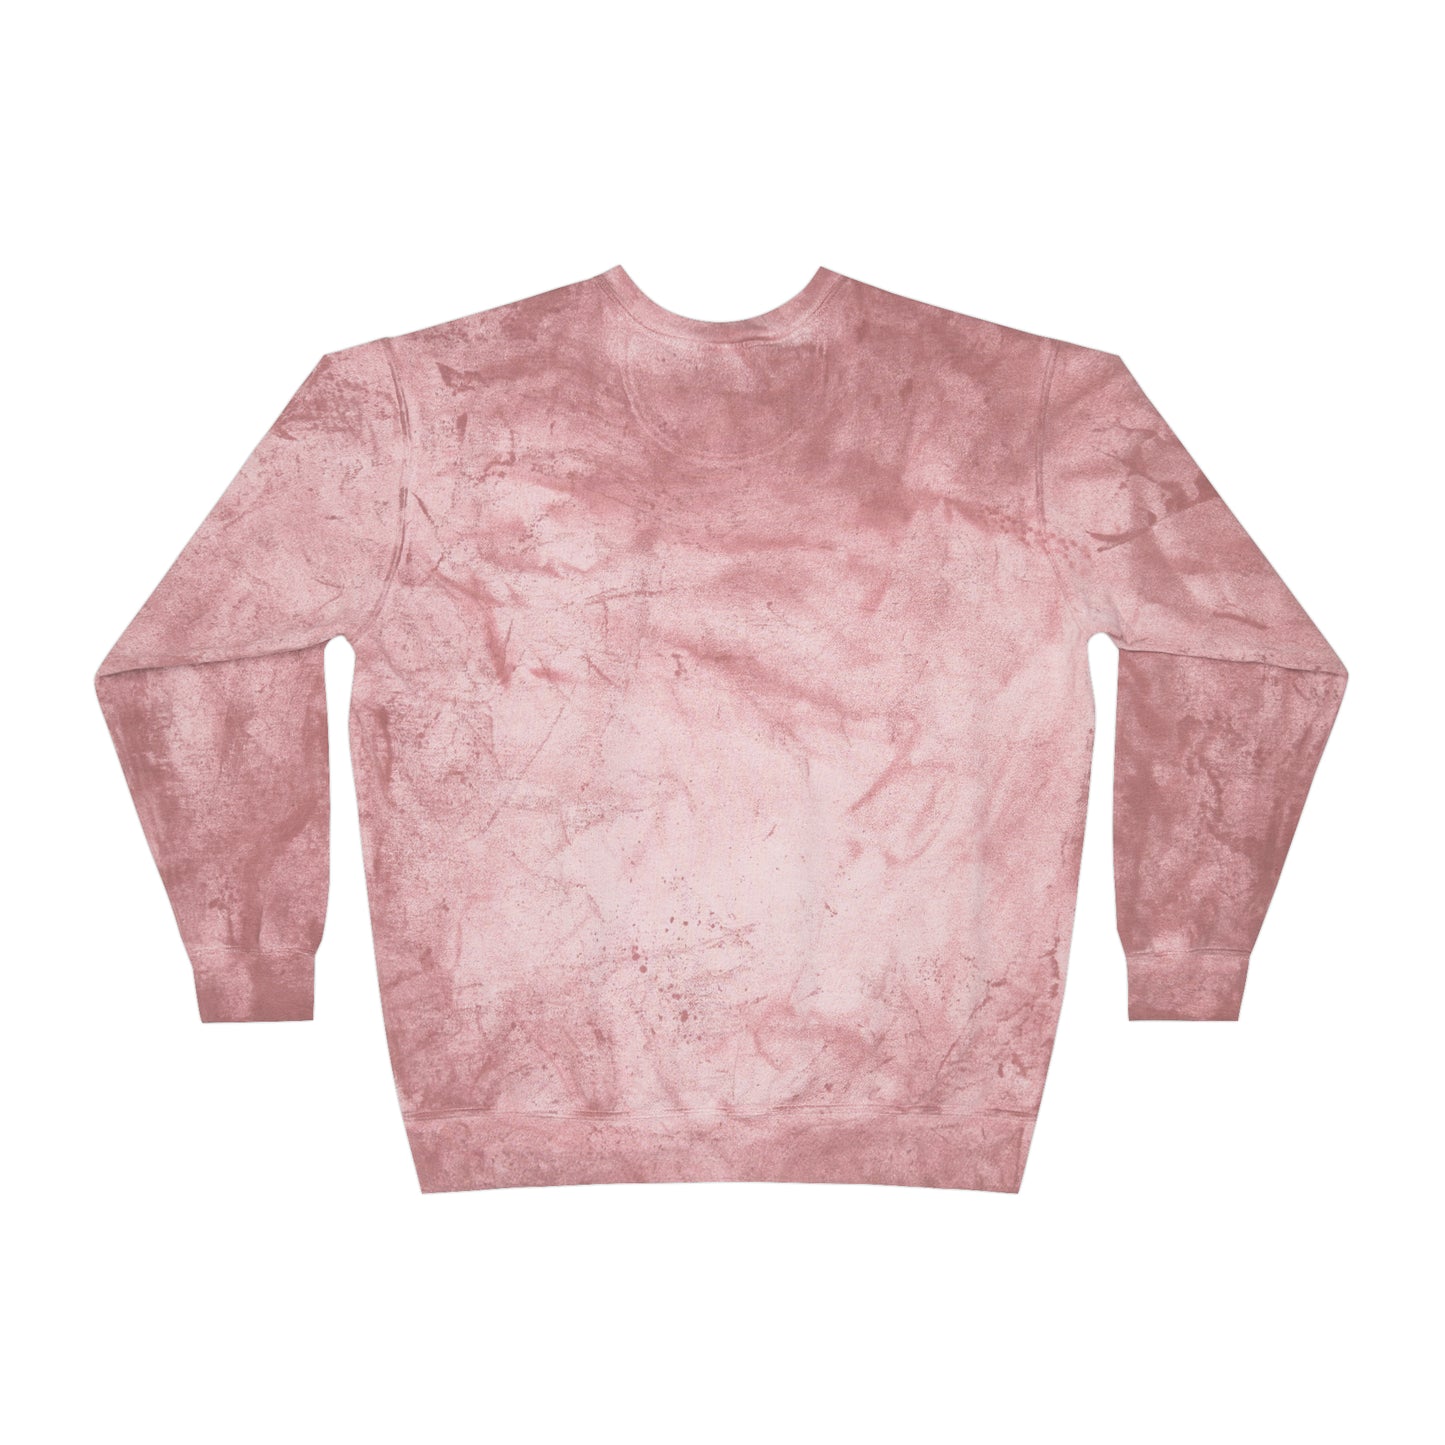 Radiant Hues Crew Neck from Made with Love